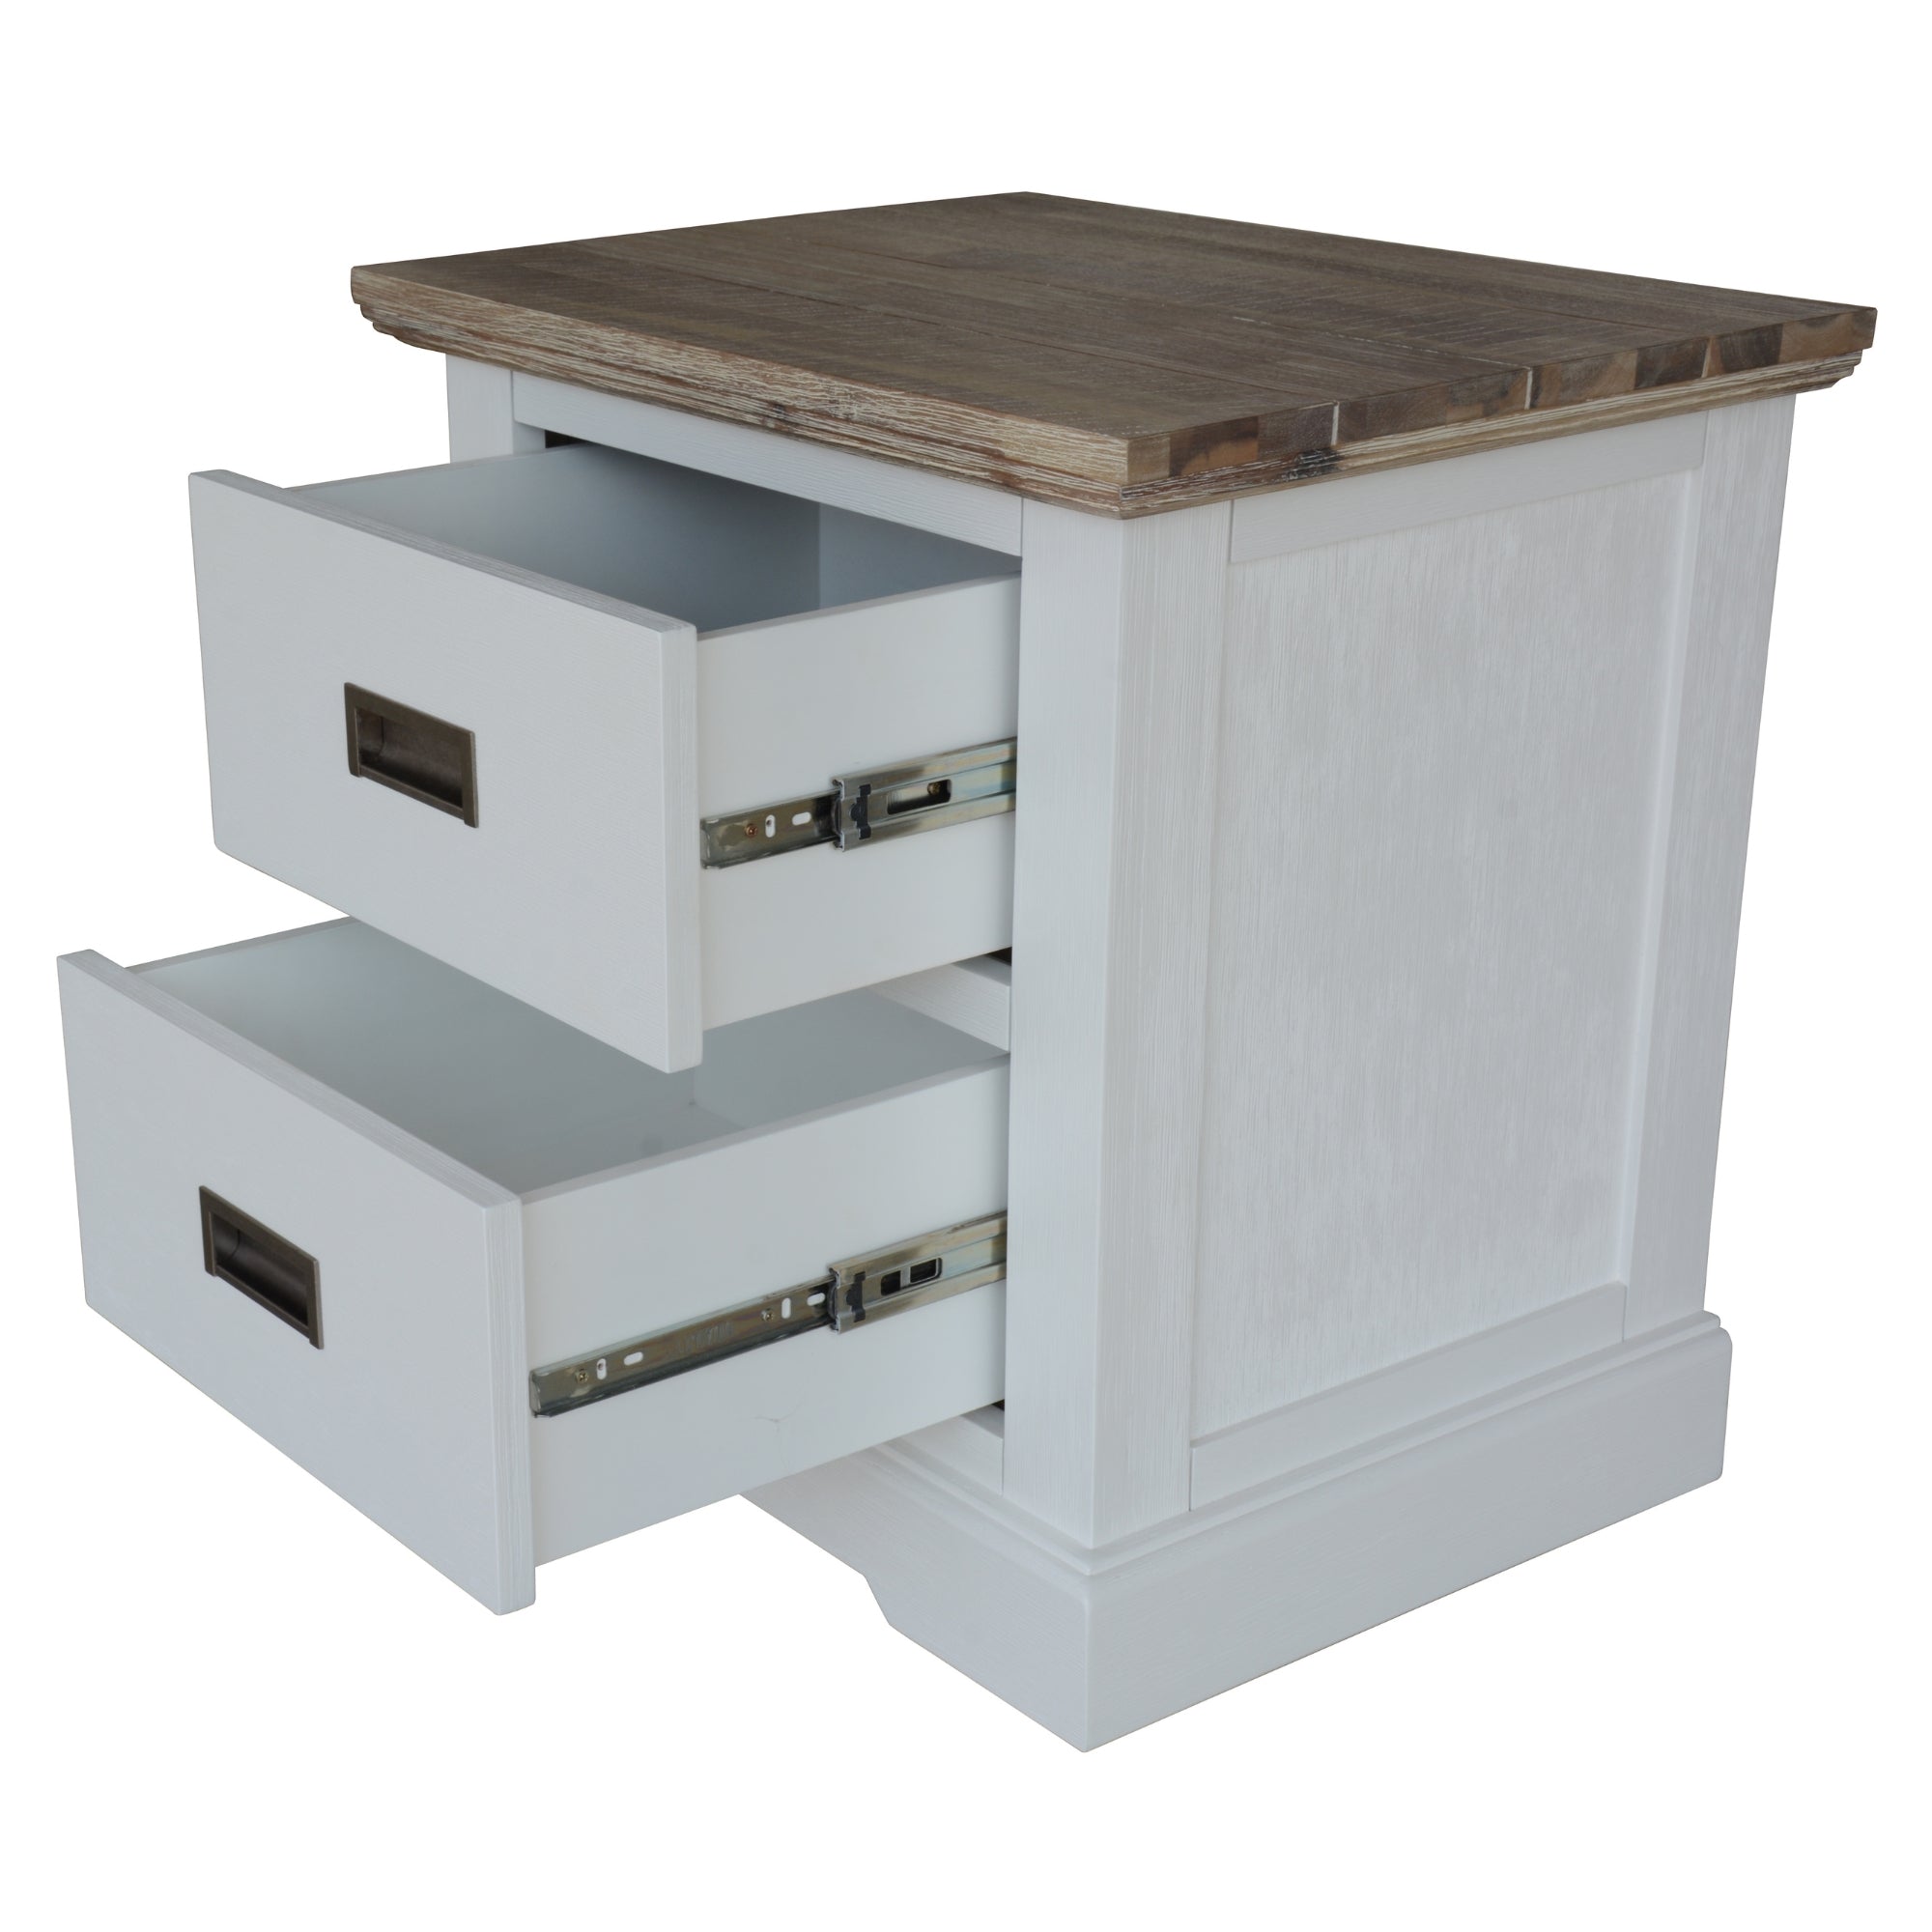 Solid Acacia Timber Bedside Table 2 Drawers White/Grey